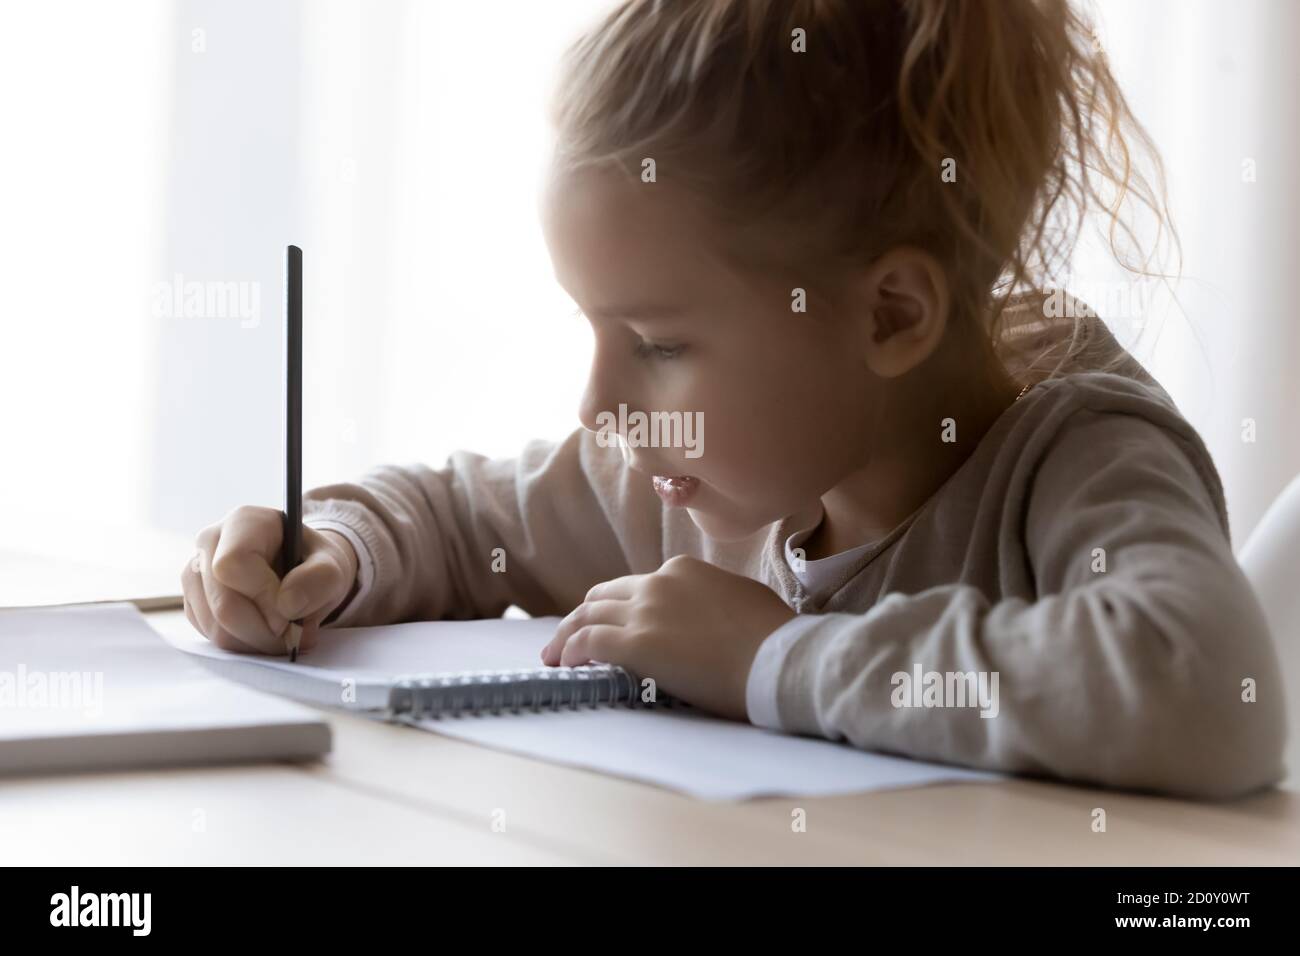 Close up serious little girl writing in notebook, studying Stock Photo